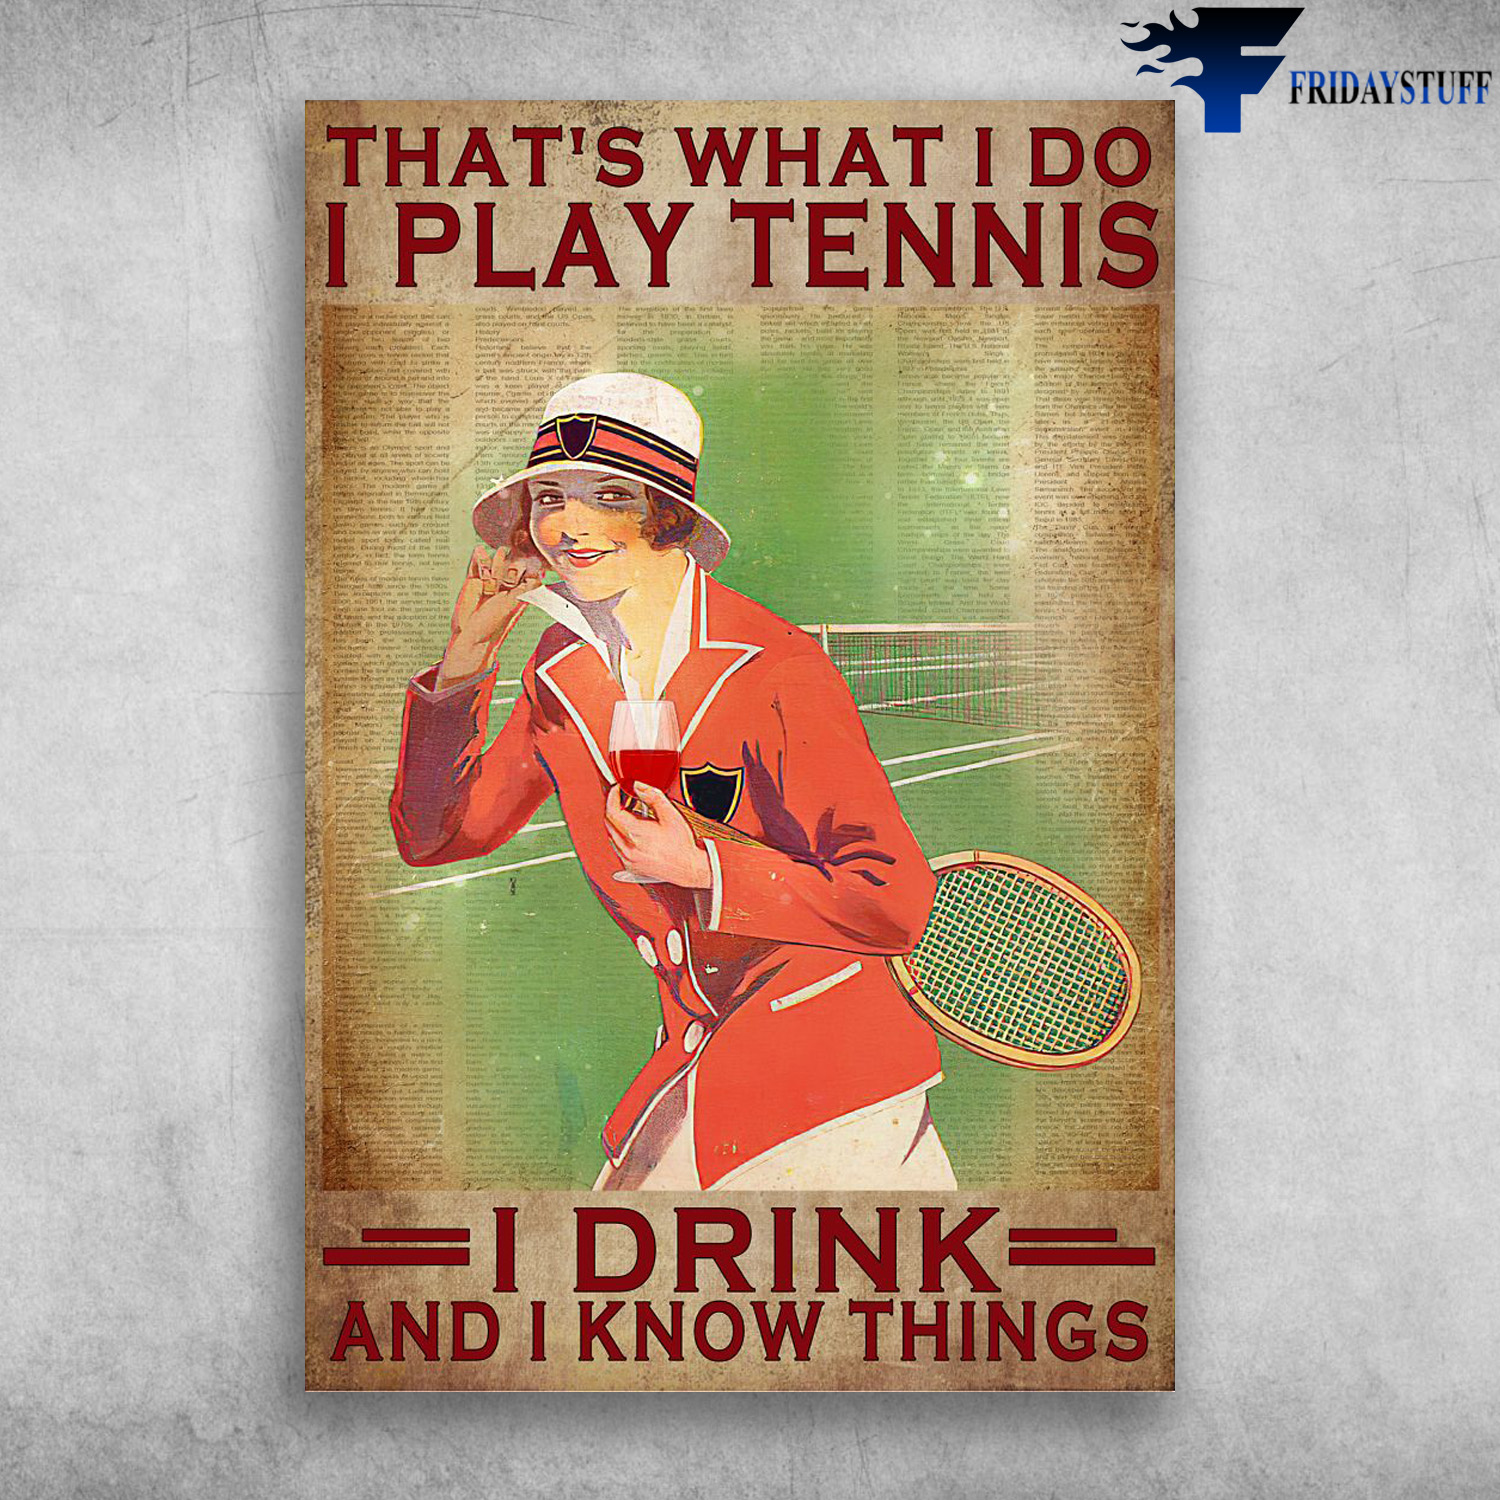 Girl Tennis, Wine - That's What I Do, I Play Tennis, I Drink, And I Know Things